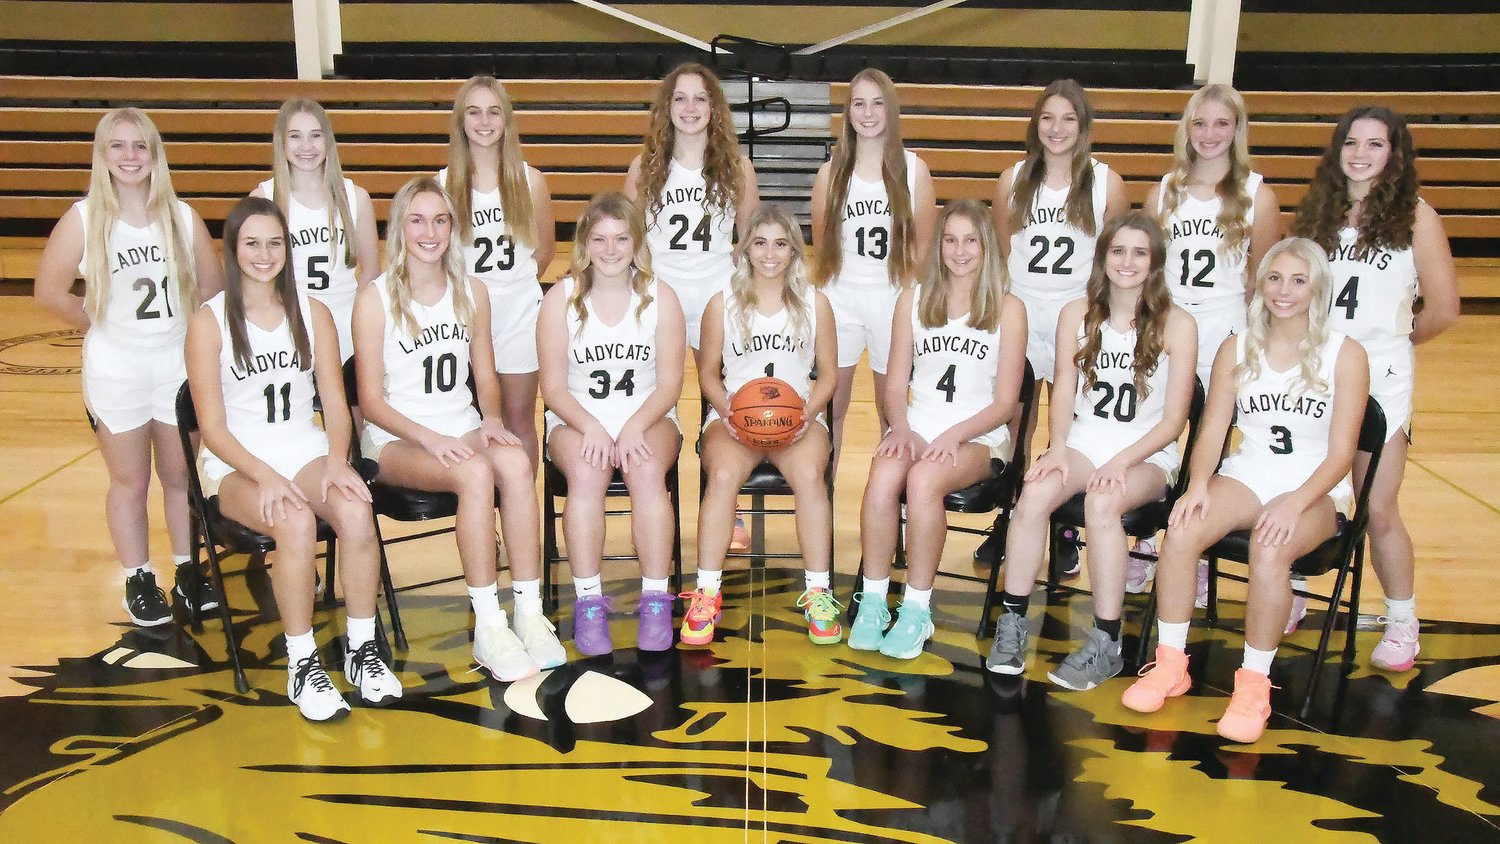 The Cairo High School girls' basketball team gathered for a team photo on Wednesday, Nov. 16. Here's the squad, front row (from left), Paige Westhues, Macie Harman, Avery Martin, Gracie Brumley, Kennedy Kearns, Jersey Bailey and Avery Brumley. Back row, Kylee Dodge, Reese Ferguson, Kailey Kearns, Megan Griffith, Melia Gittemeier, Mallori Hankins, Addison Bailey and Olivia Cross.